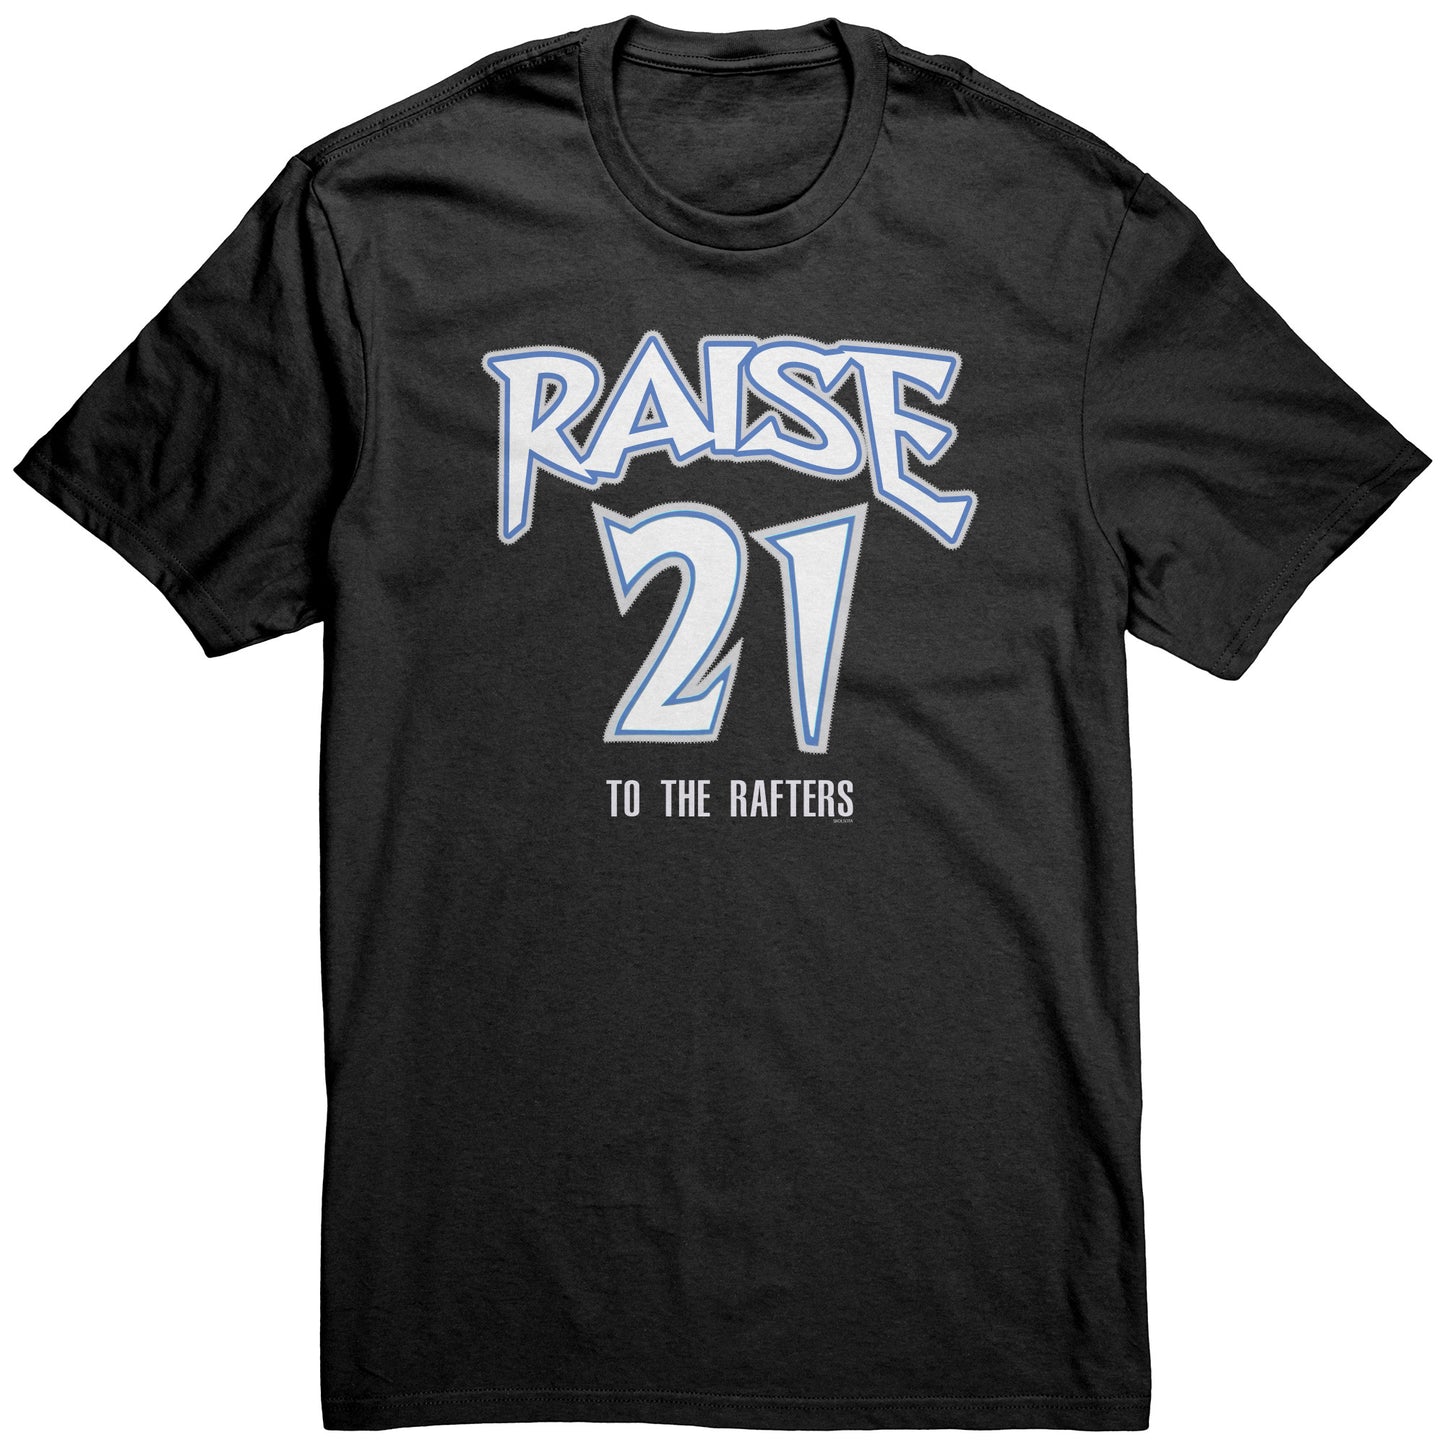 Raise 21 to the Rafters